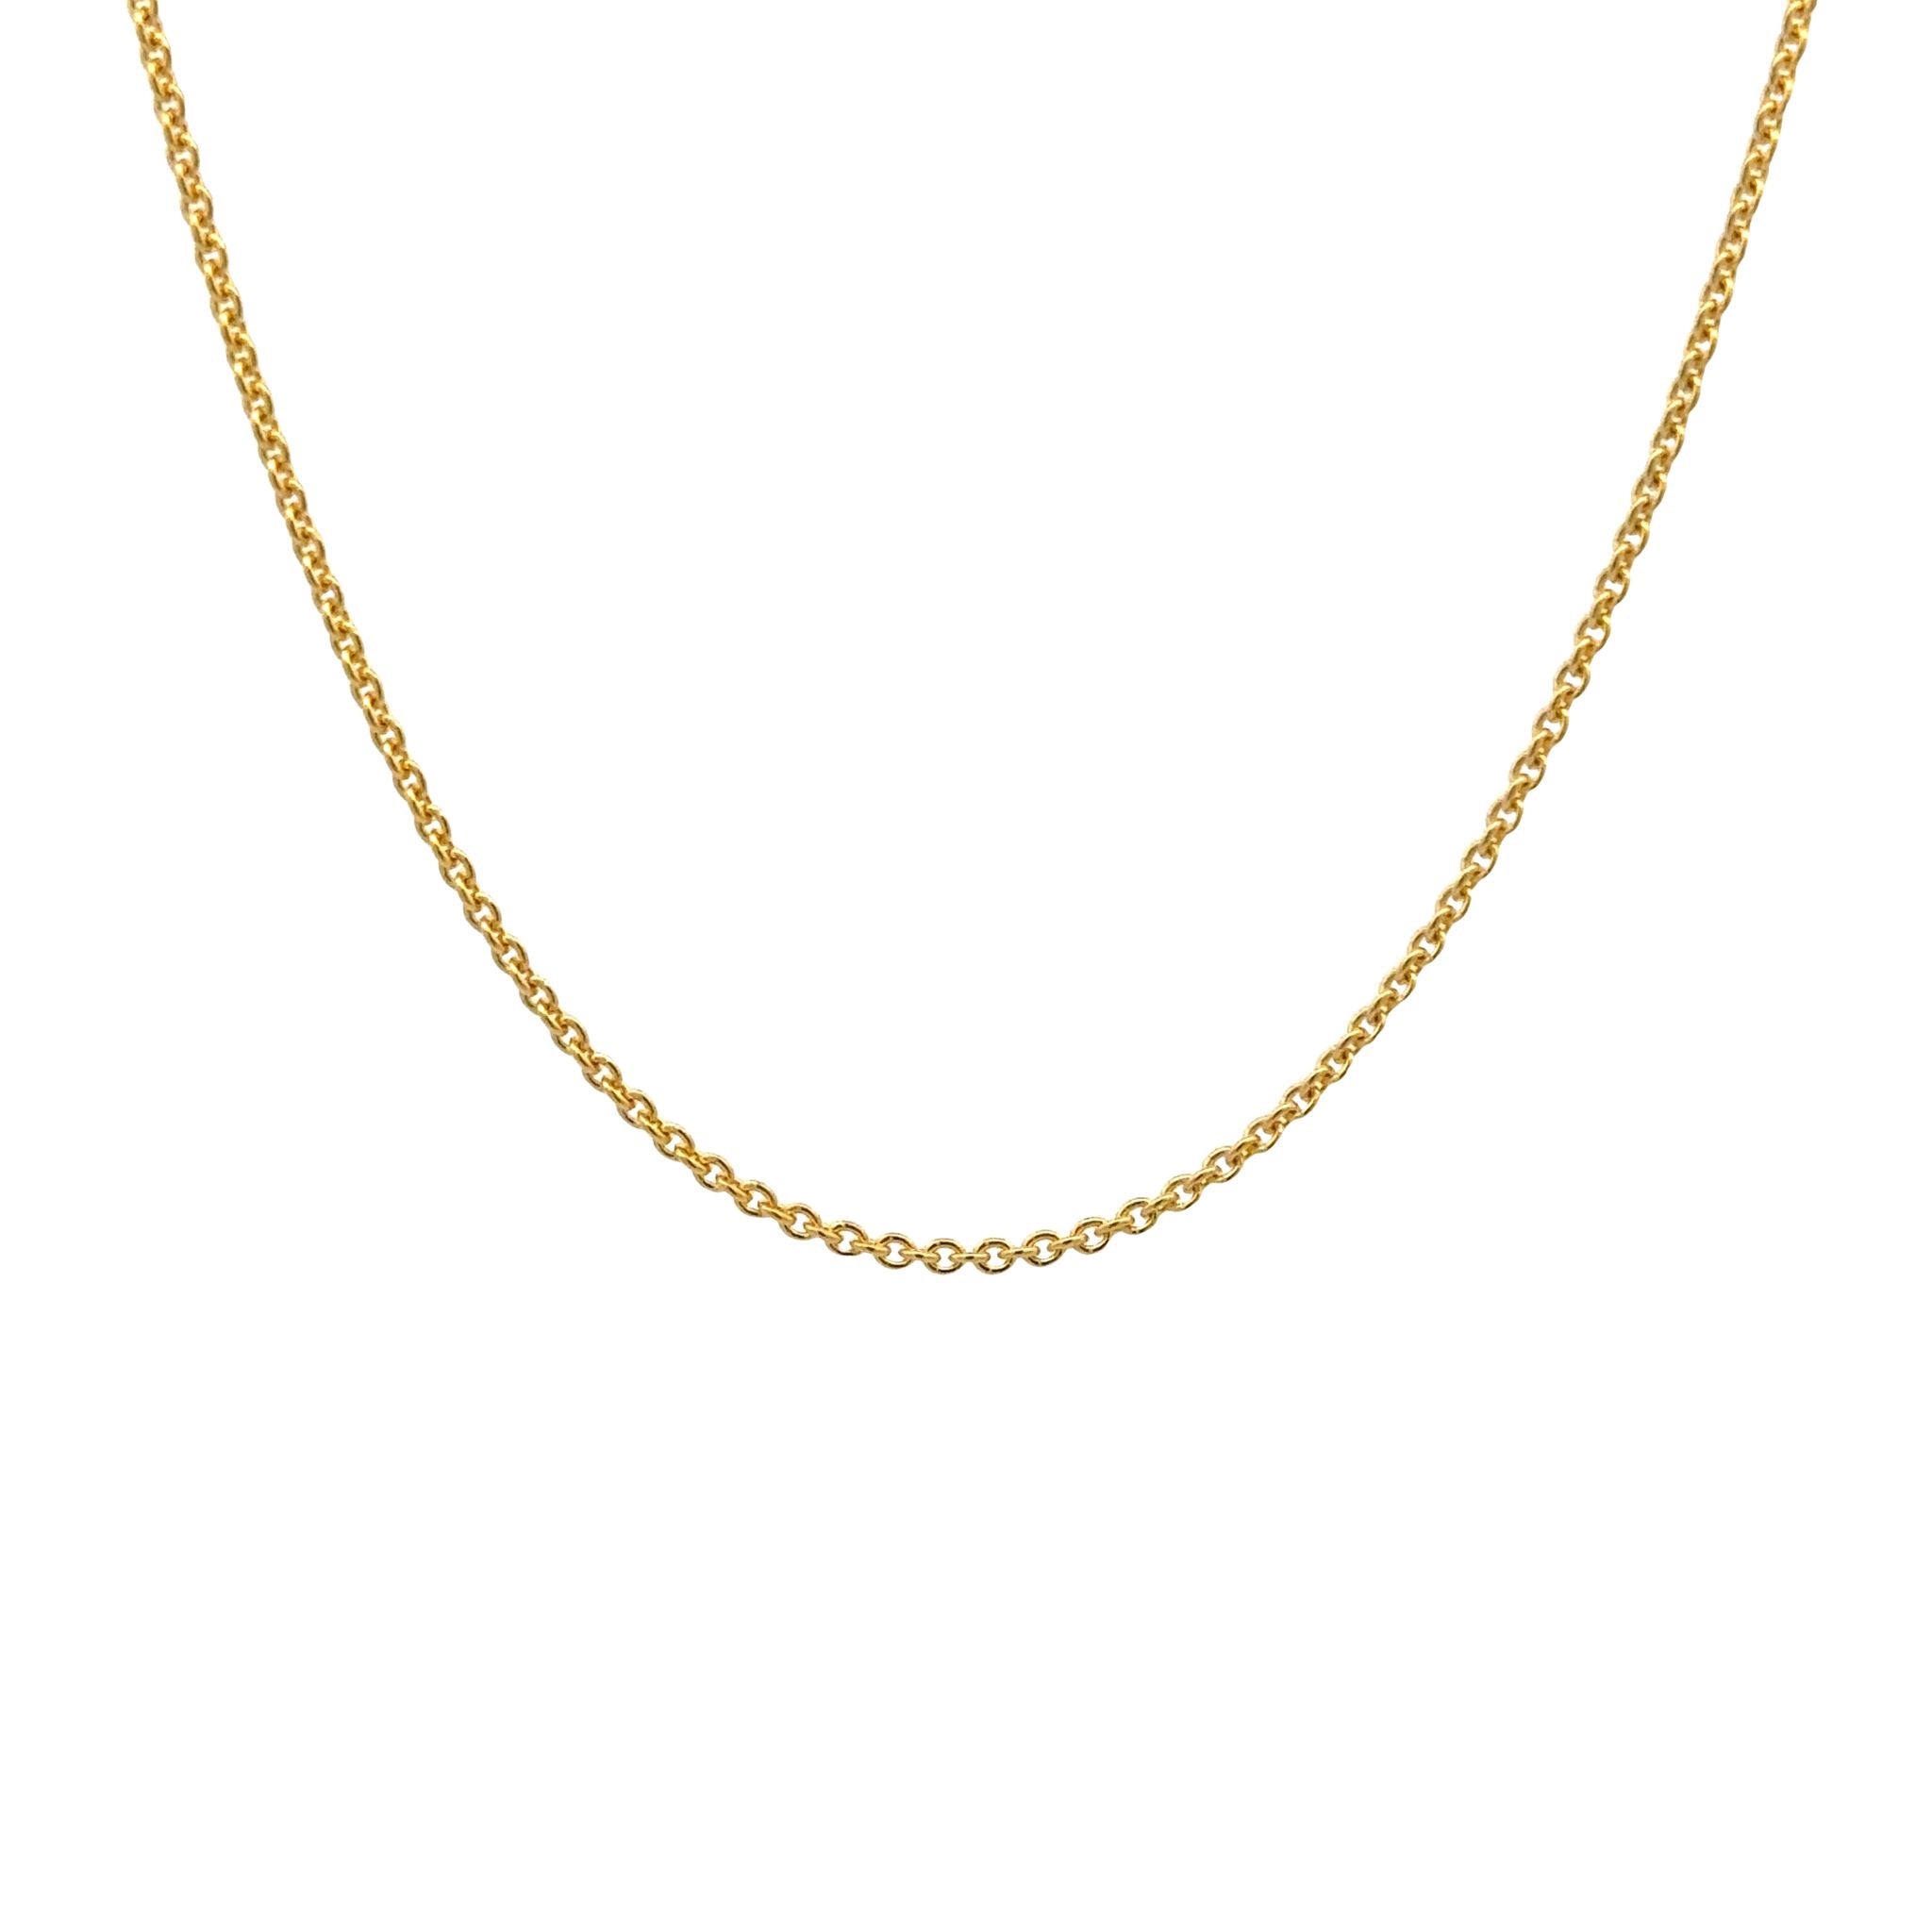 9K Yellow Gold Polished 58cm Adjustable Cable Chain 1.4mm